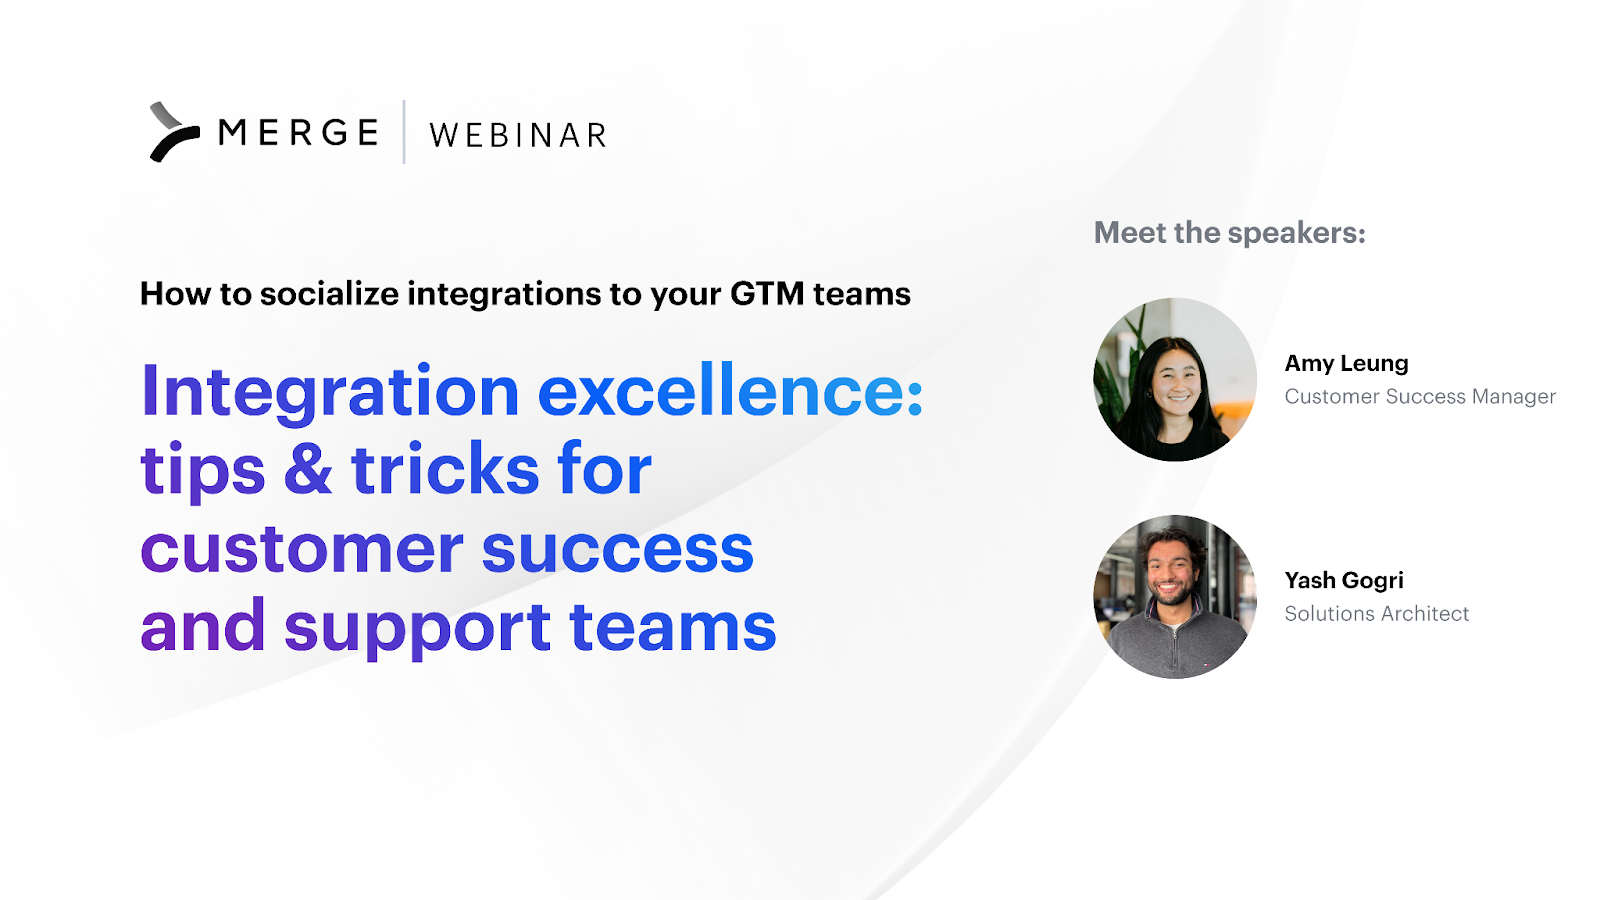 Image that promotes Merge's webinar on supporting integrations